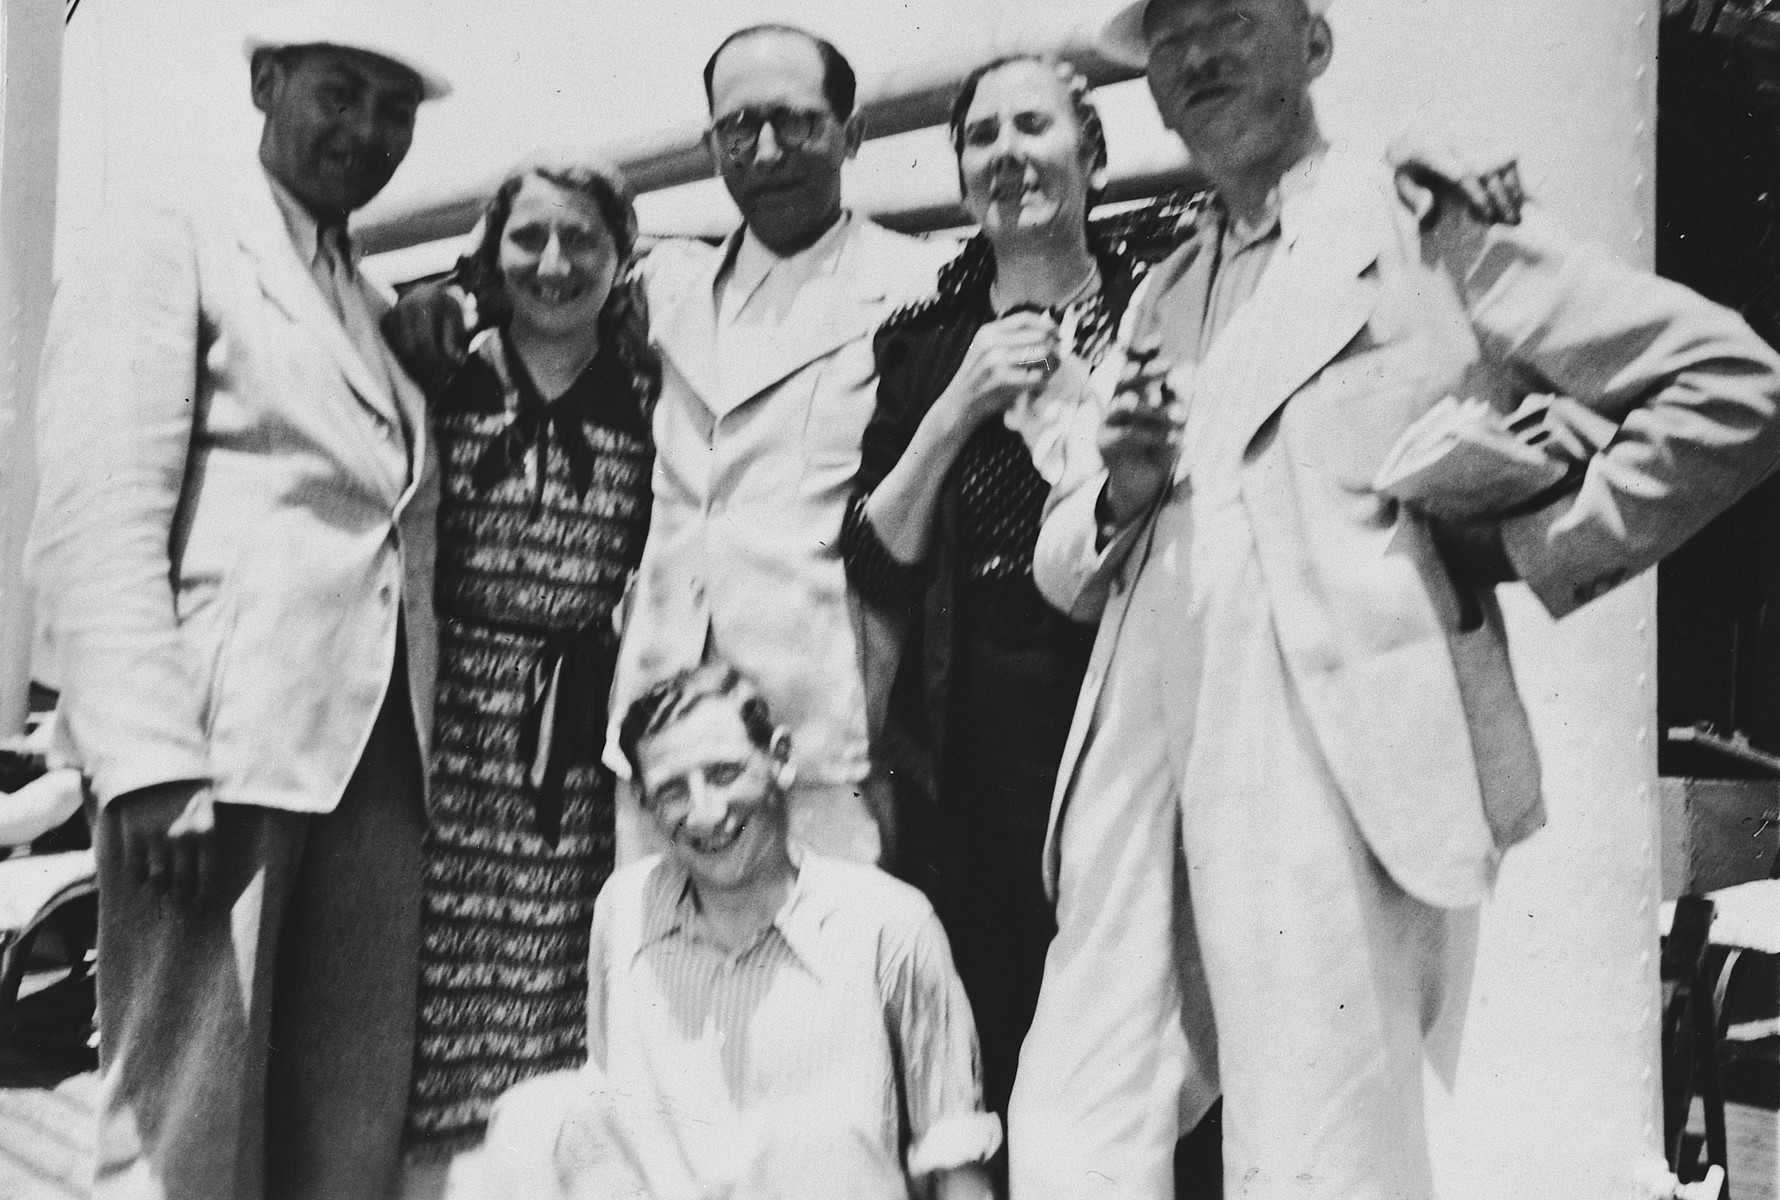 Jewish refugees from Breslau pose on the deck of the St. Louis.

Seated in front is Ernst Meyer.  Standing left to right are Kurt Marcus, Ilse Marcus, a friend from Breslau, Elfriede Meyer, and Berthold Meyer.